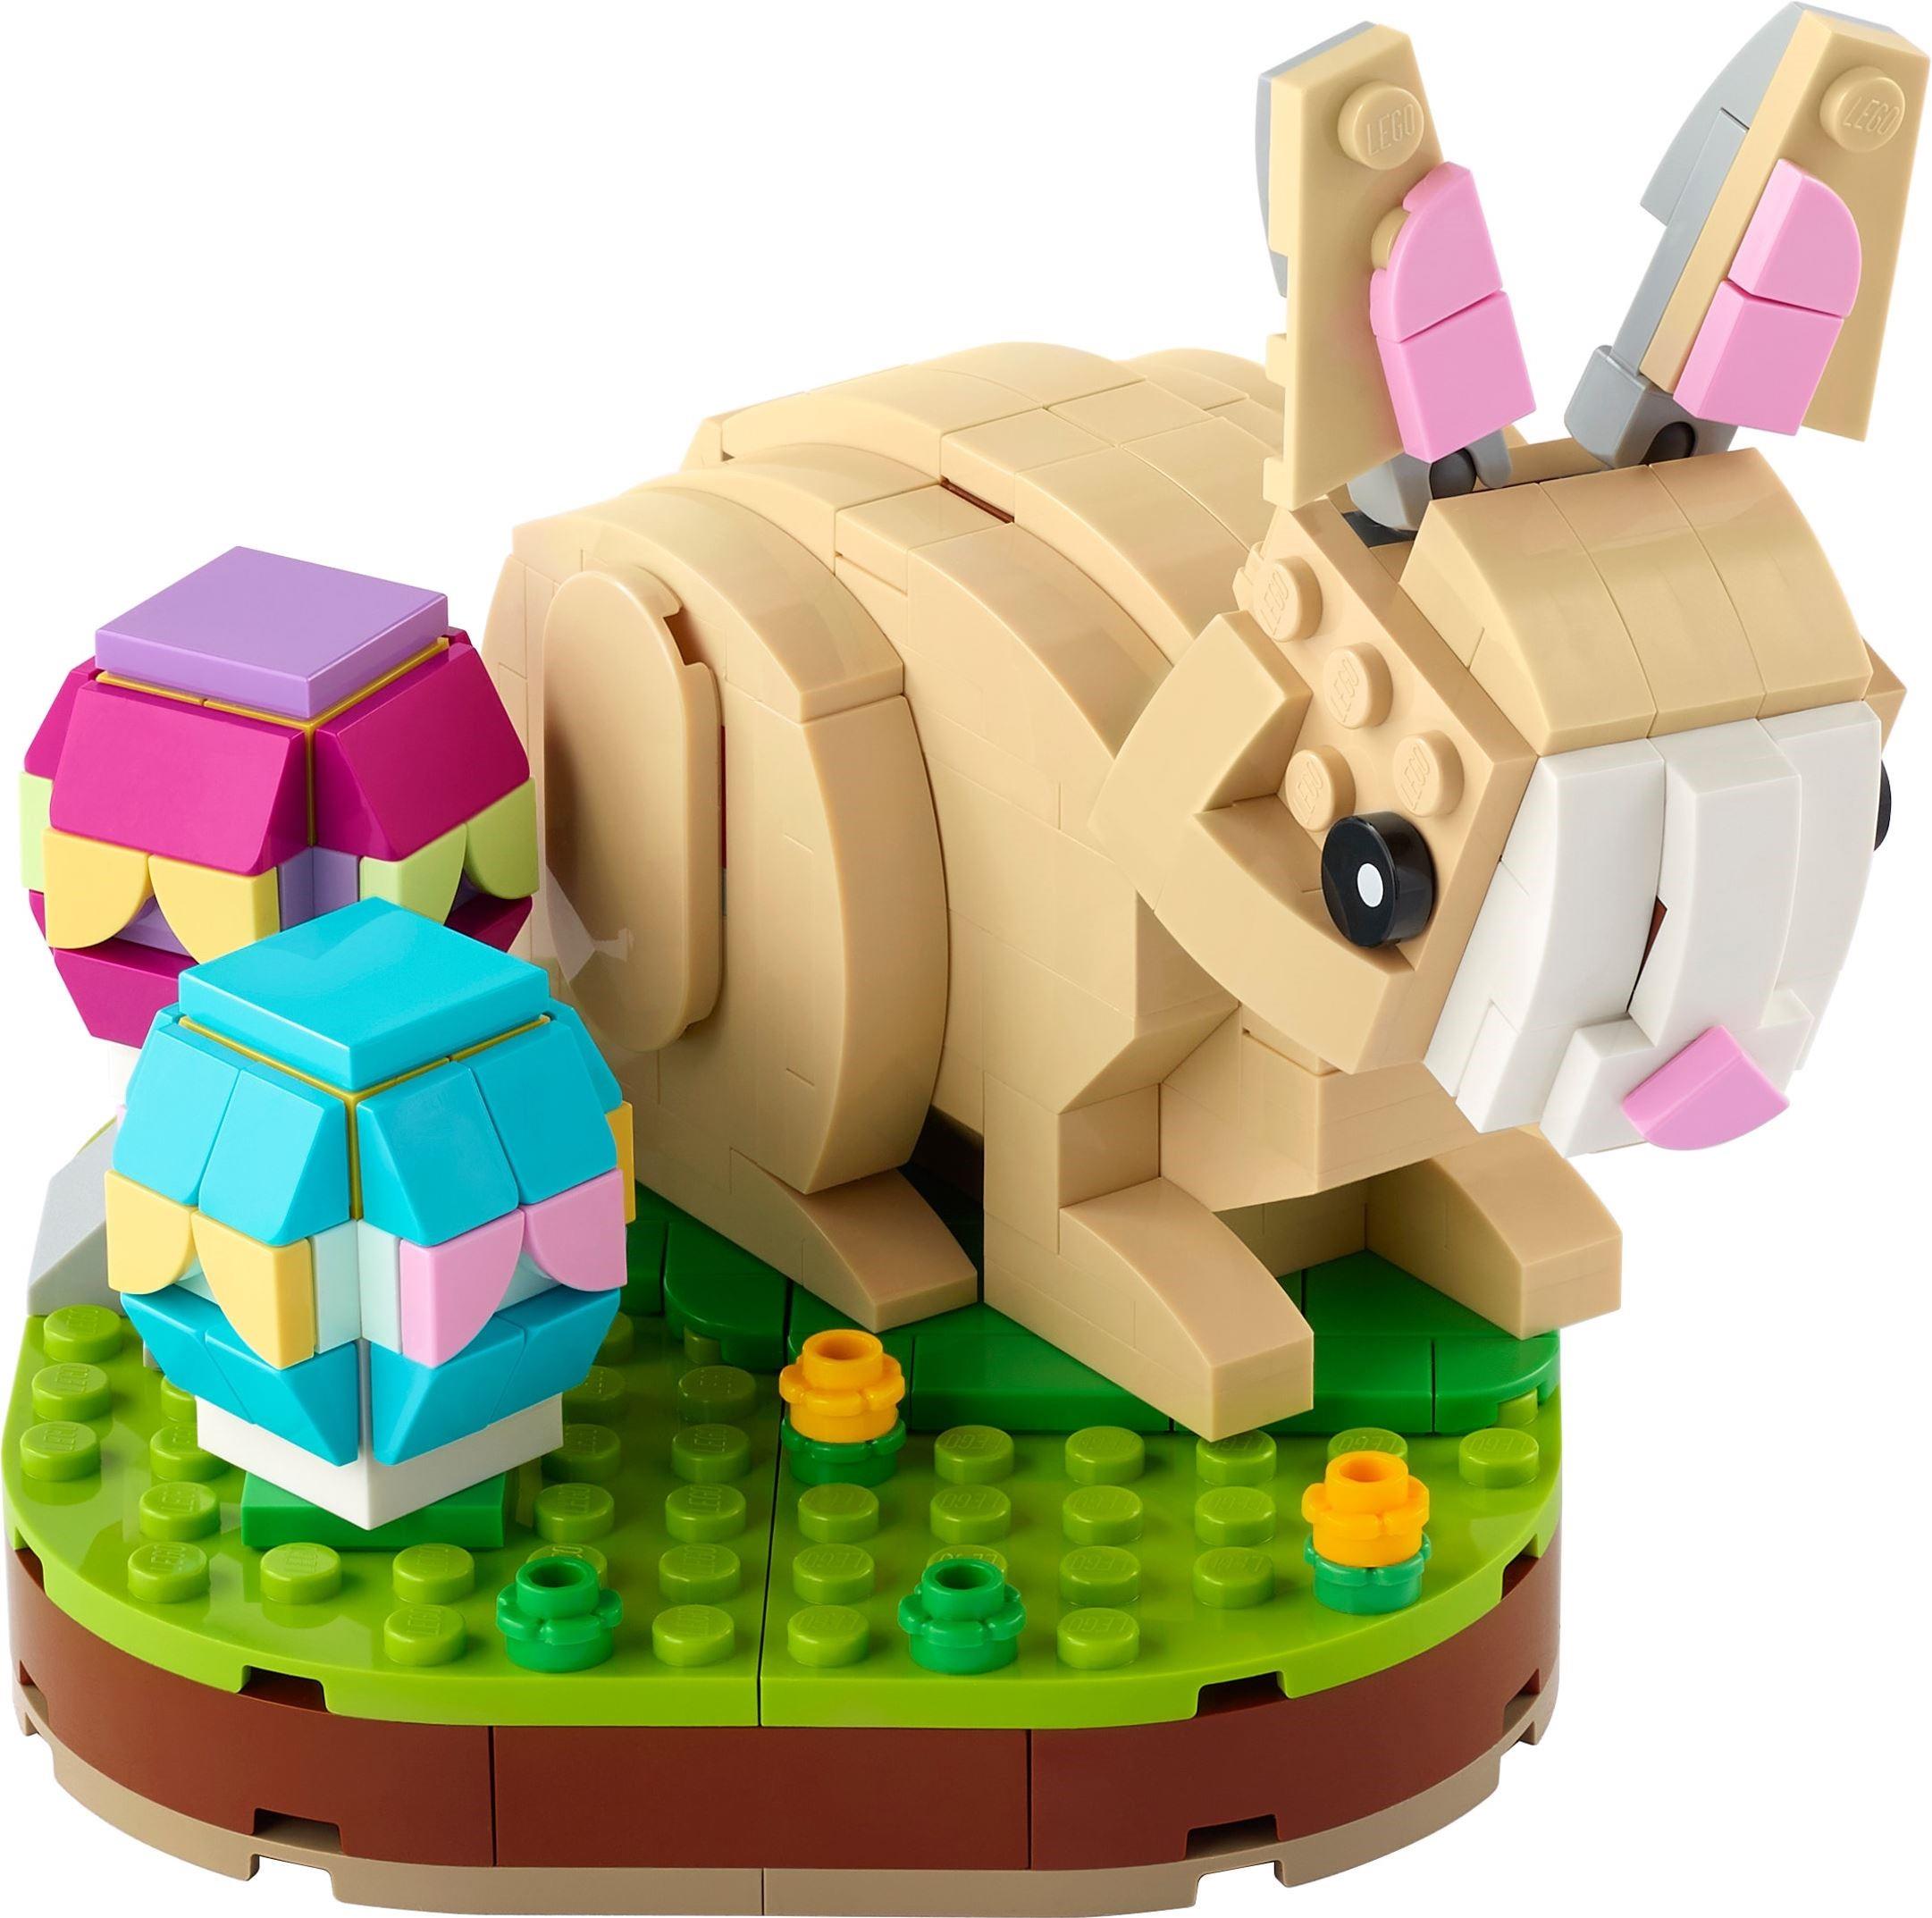 LEGO CREATOR Easter Chick Egg 30579 52 Pieces NEW 2021 Basket Gift Bunny Cute 